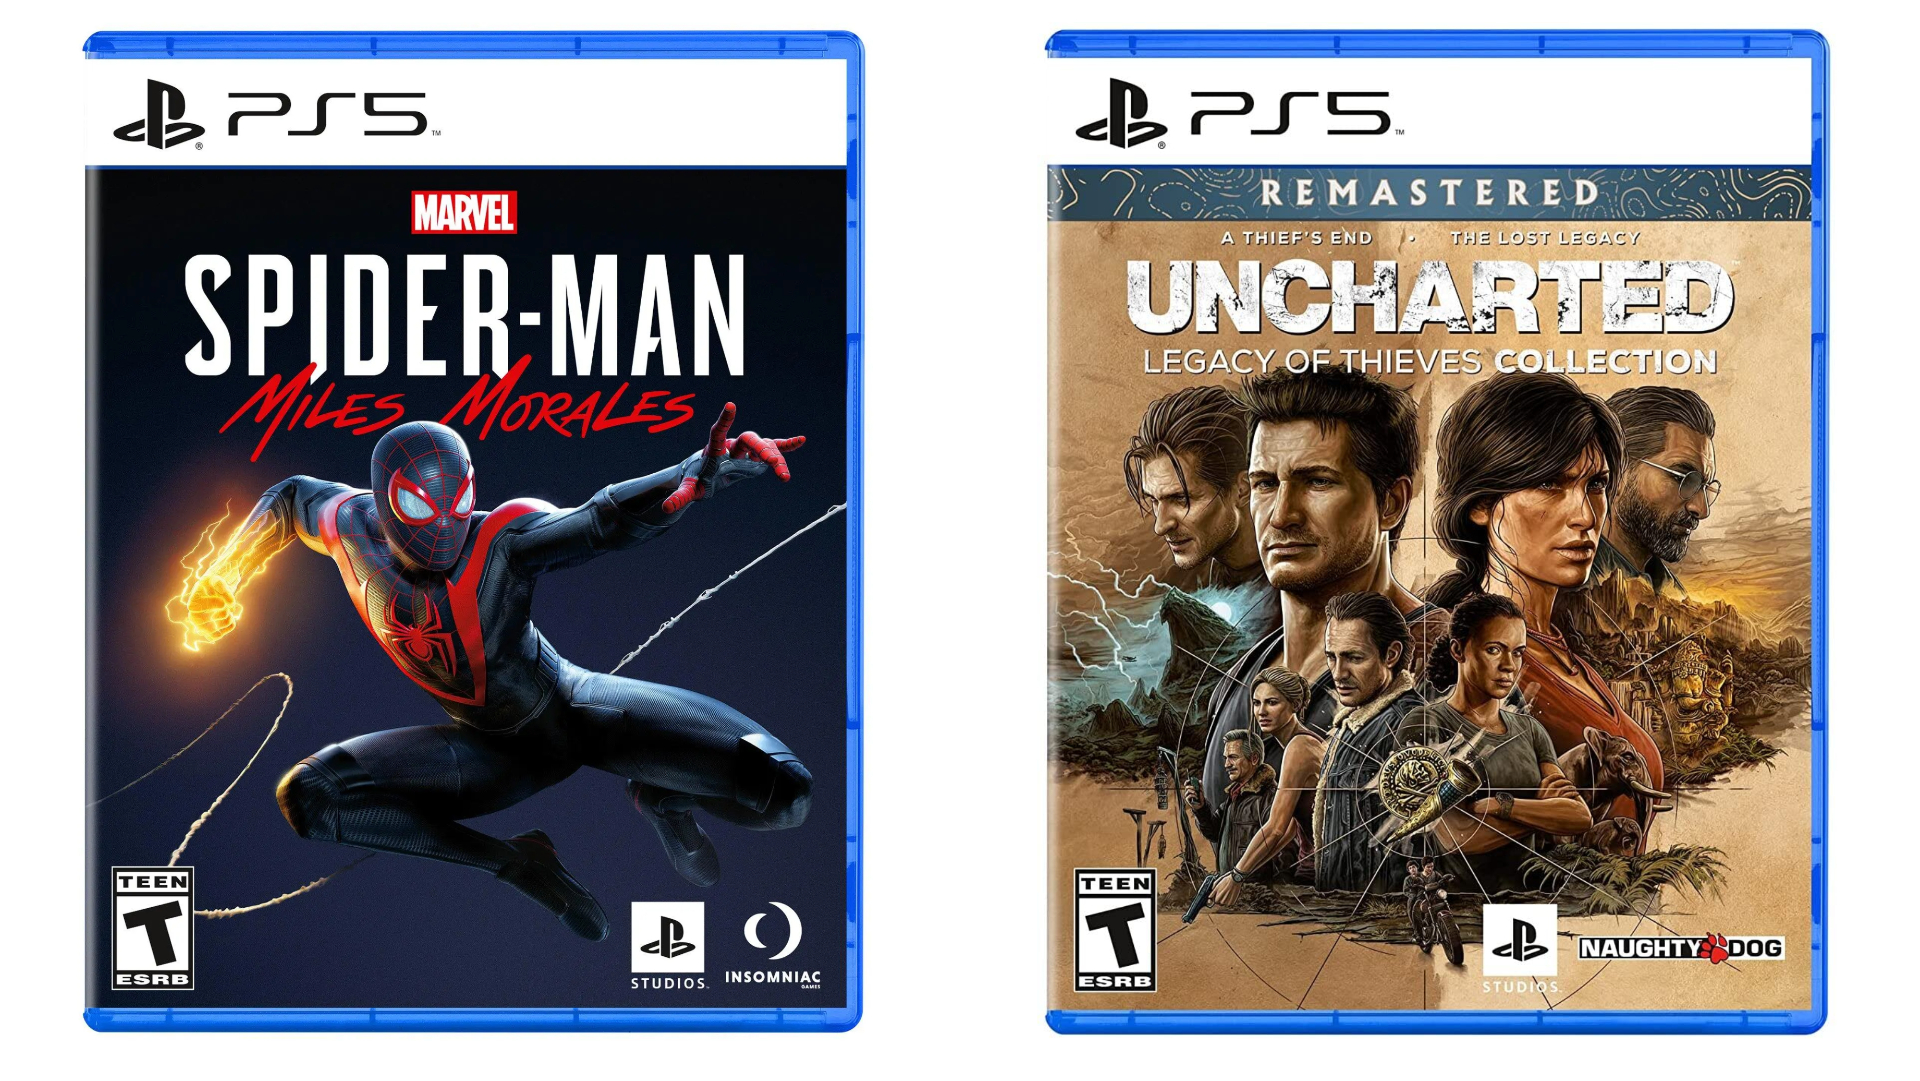 Spiderman and Uncharted